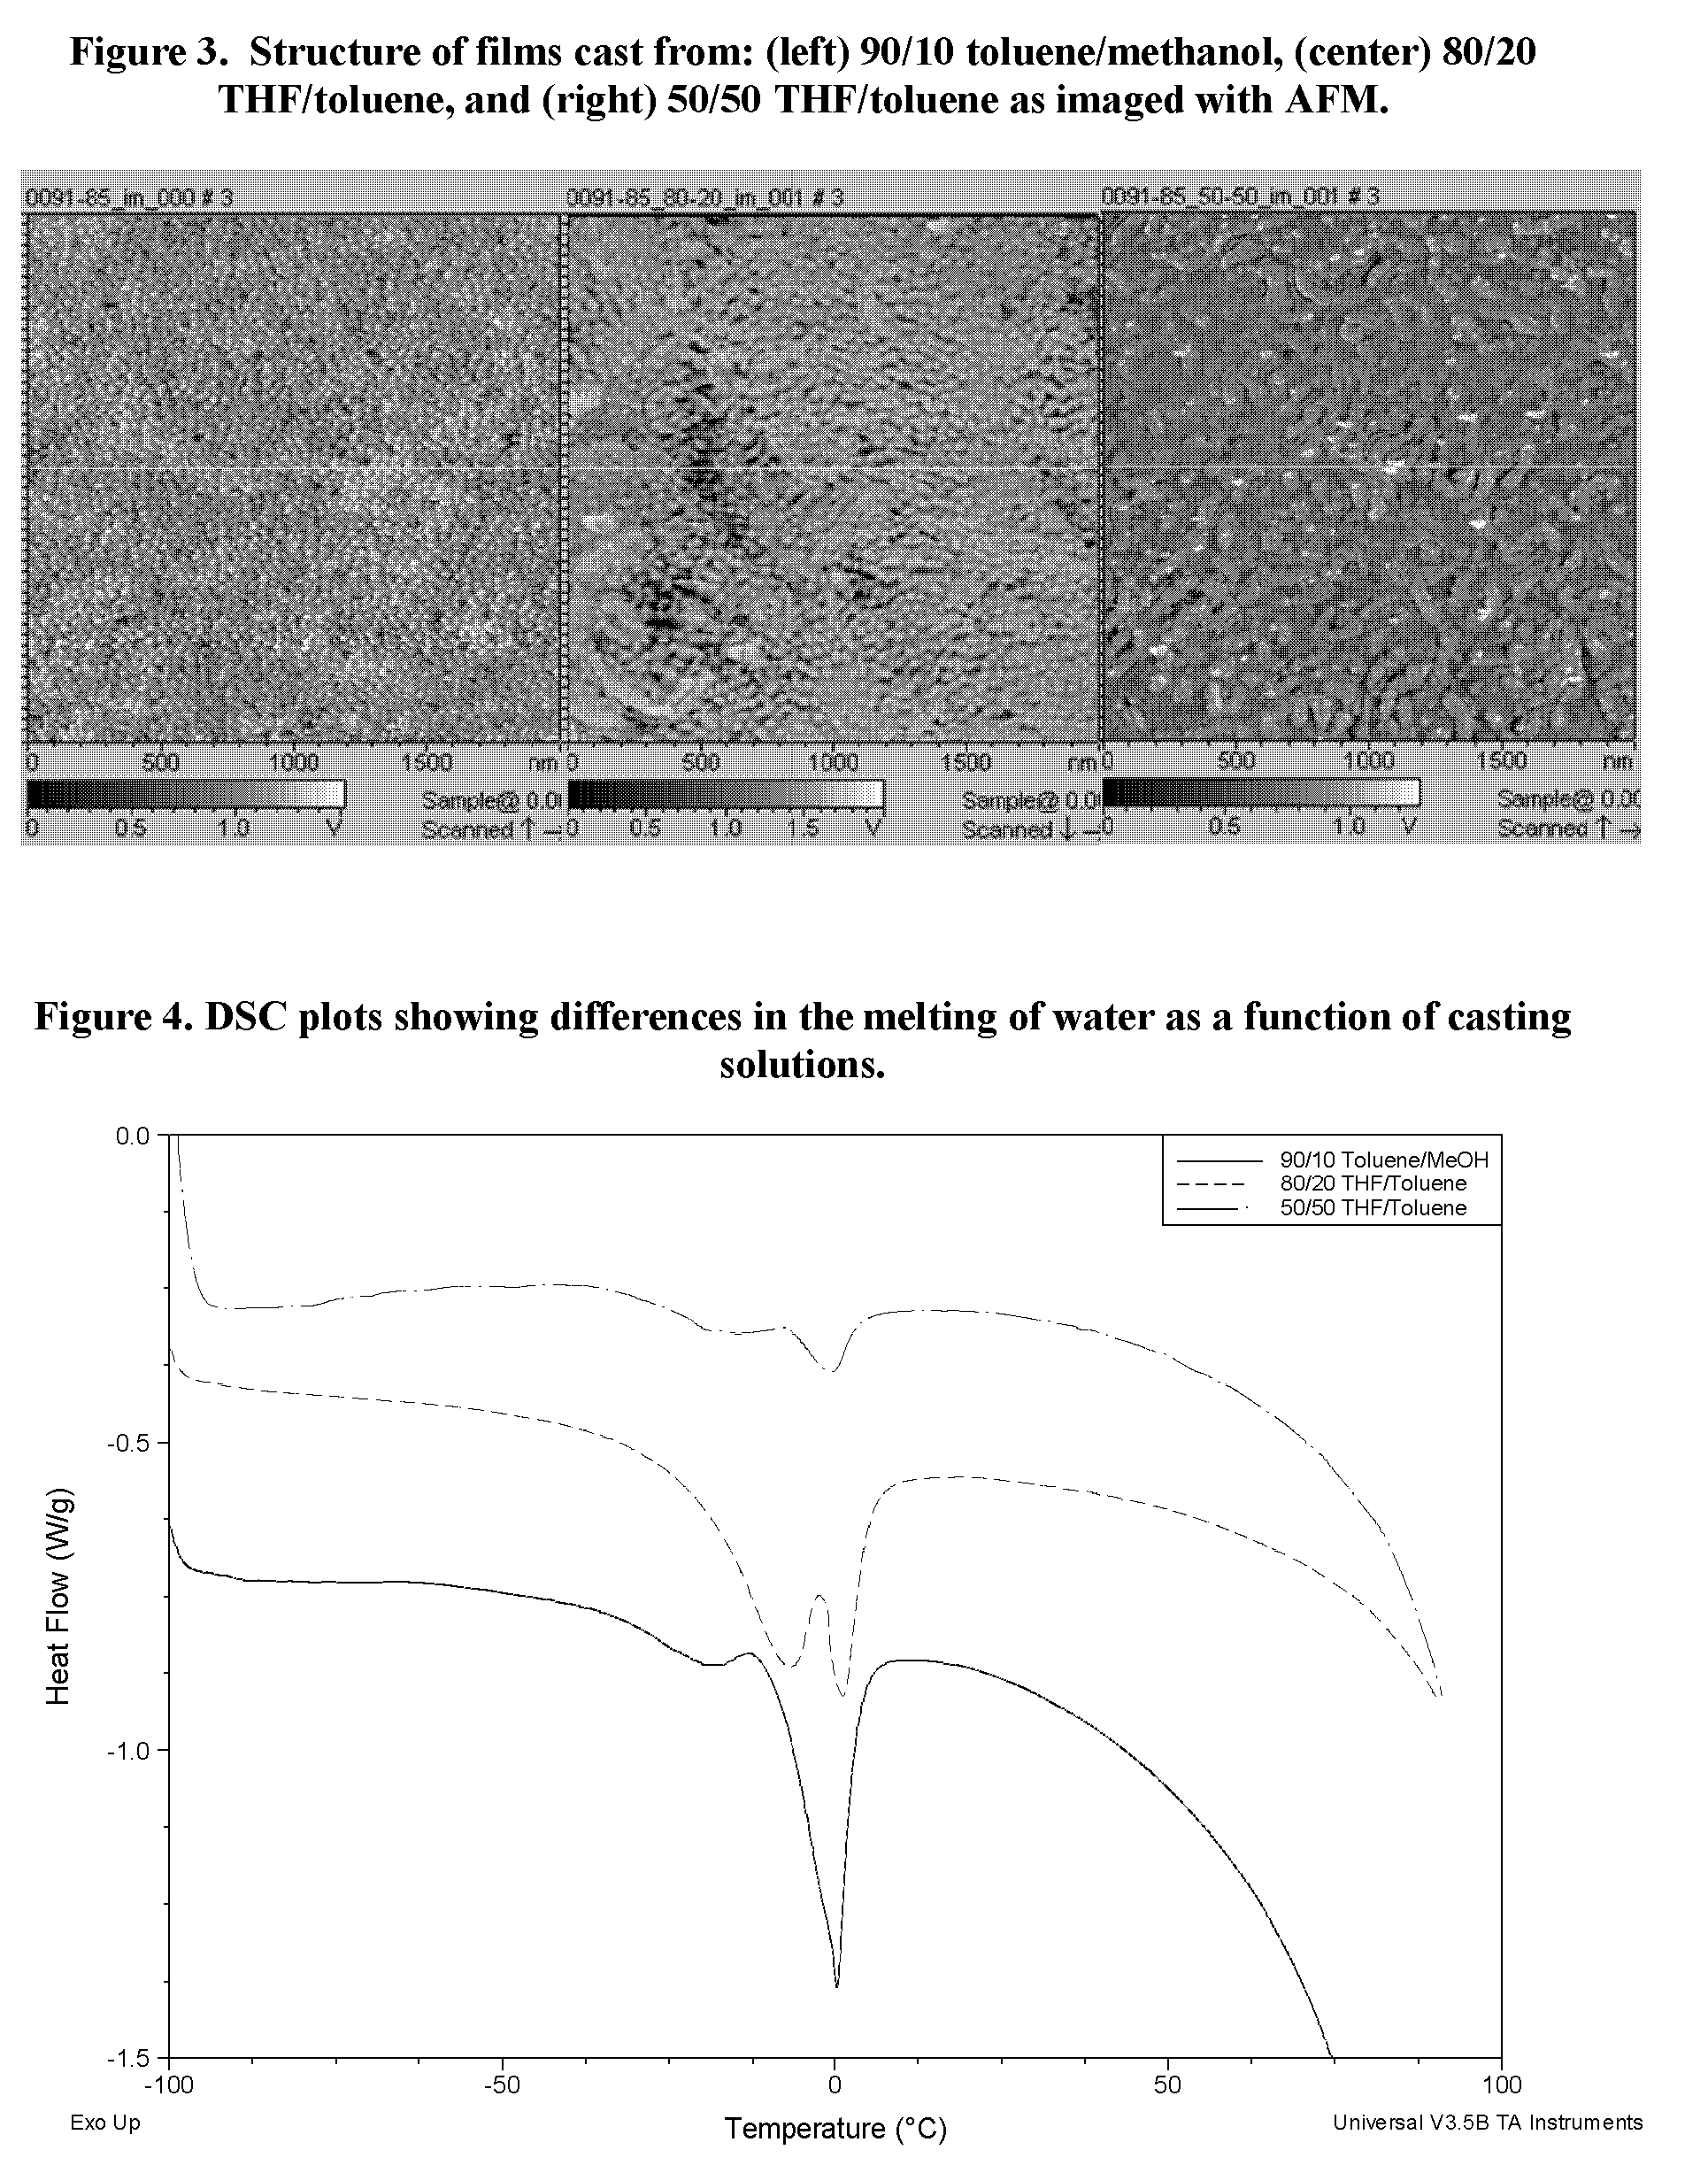 Sulfonated block copolymers, method for making same, and various uses for such block copolymers